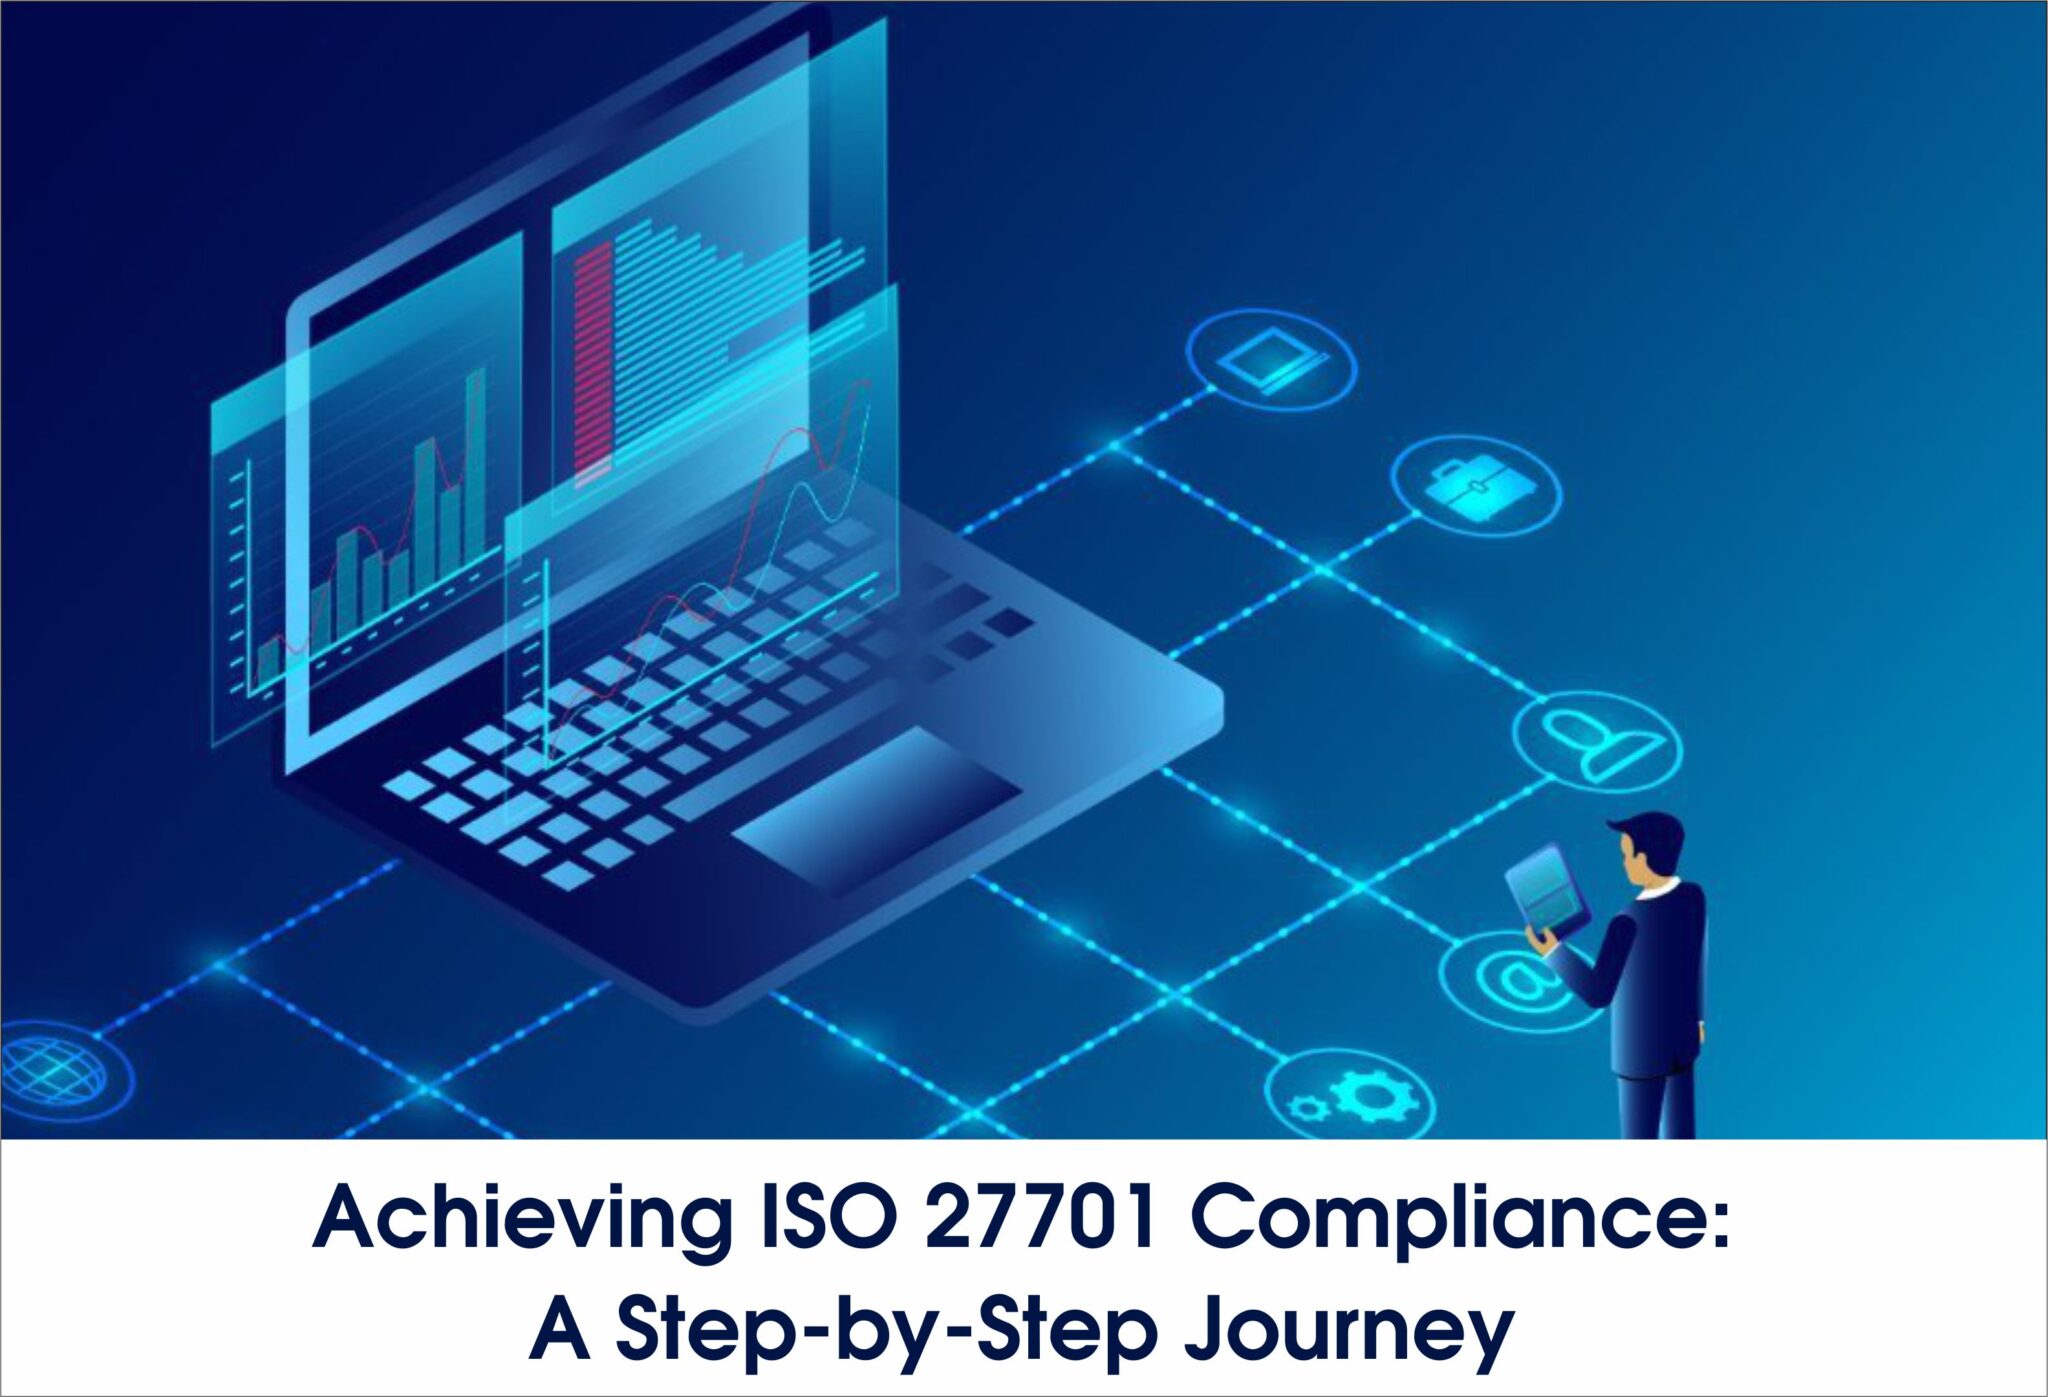 Achieving ISO 27701 Compliance: A Step-by-Step Journey